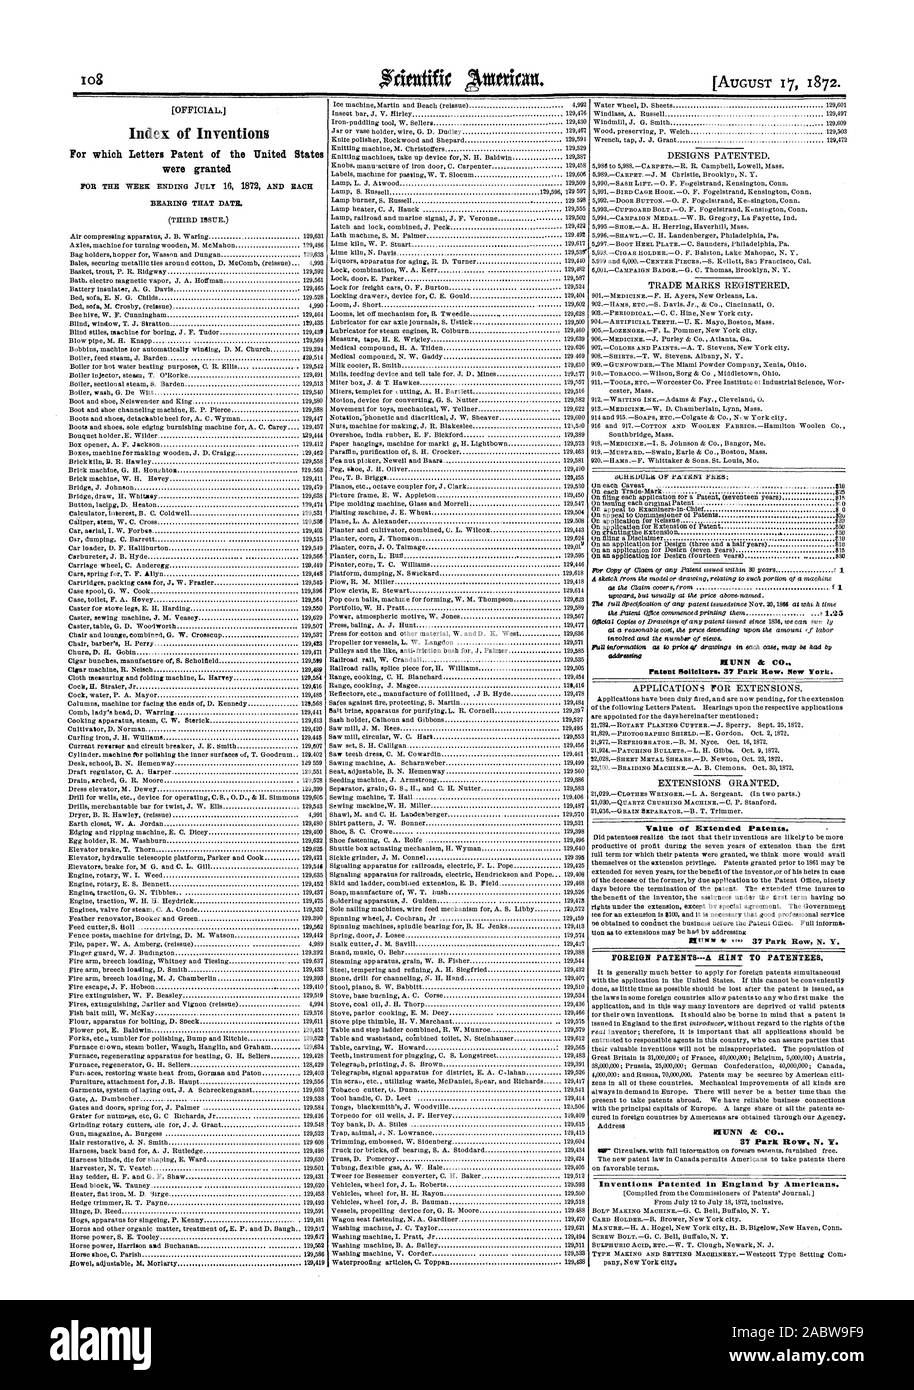 [OFFICIAL. Index of Inventions For which Letters Patent of the United States were granted 50 addressing Patent Solicitors. 37 Park Row Mew York. Value of Extended Patents. FOREIGN PATENTS-A SINT TO PATENTEES. NIUNN k C 37 Park Row N. V. Inventions 'Patented in England by Americans., scientific american, 1872-08-17 Stock Photo